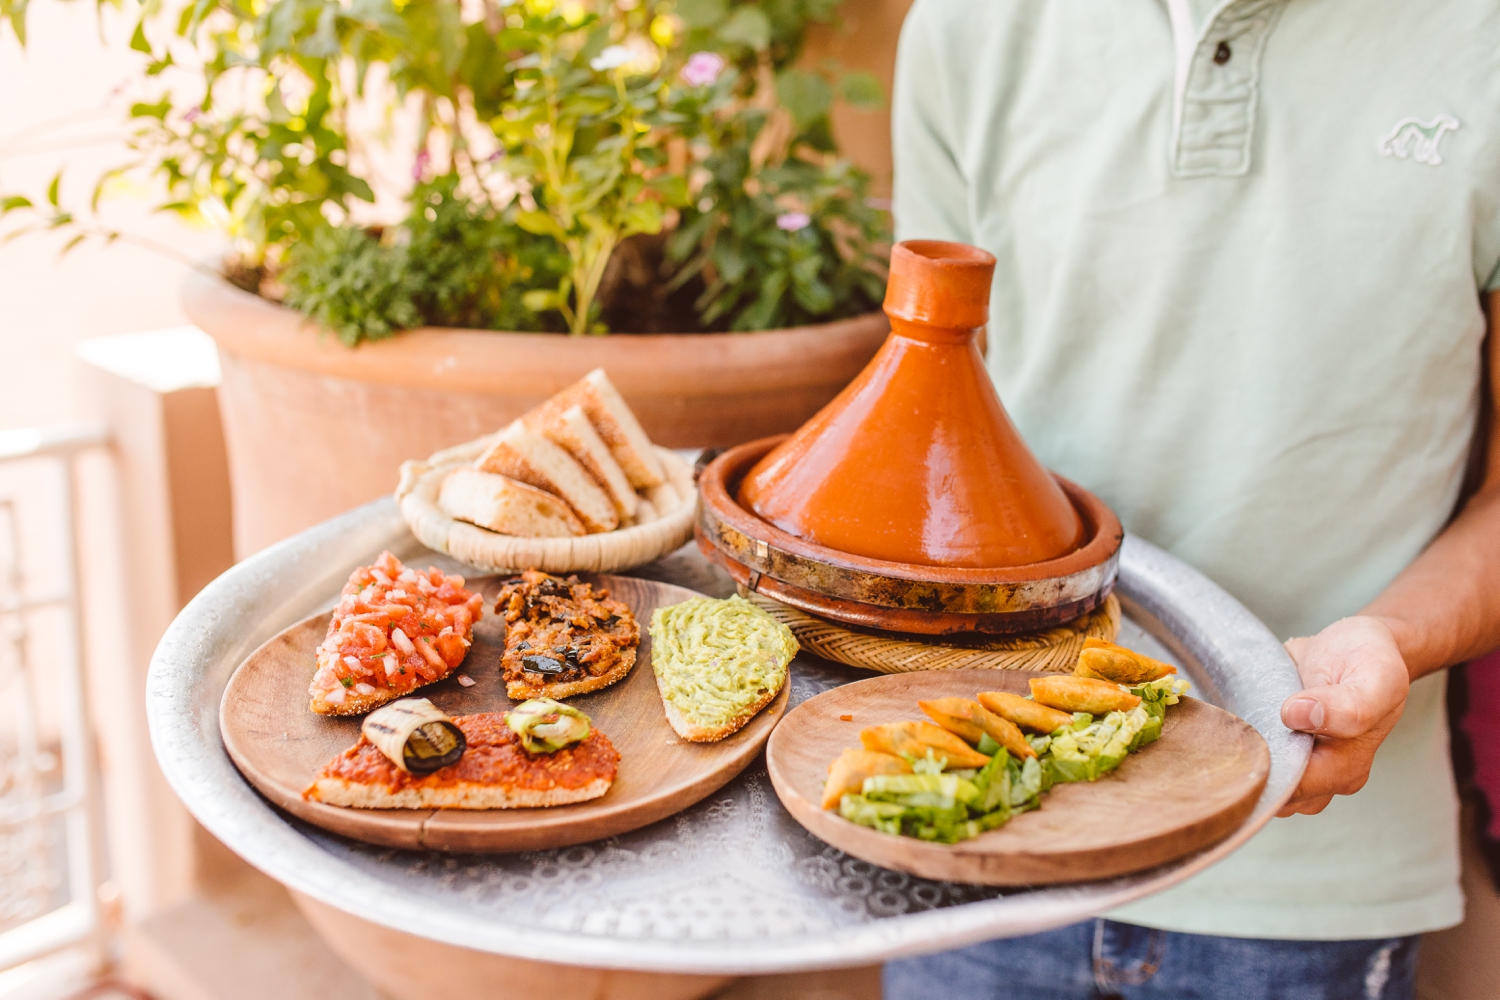 Photo taken by travel photographer of traditional Moroccan tagine | Brooke Michelle Photography